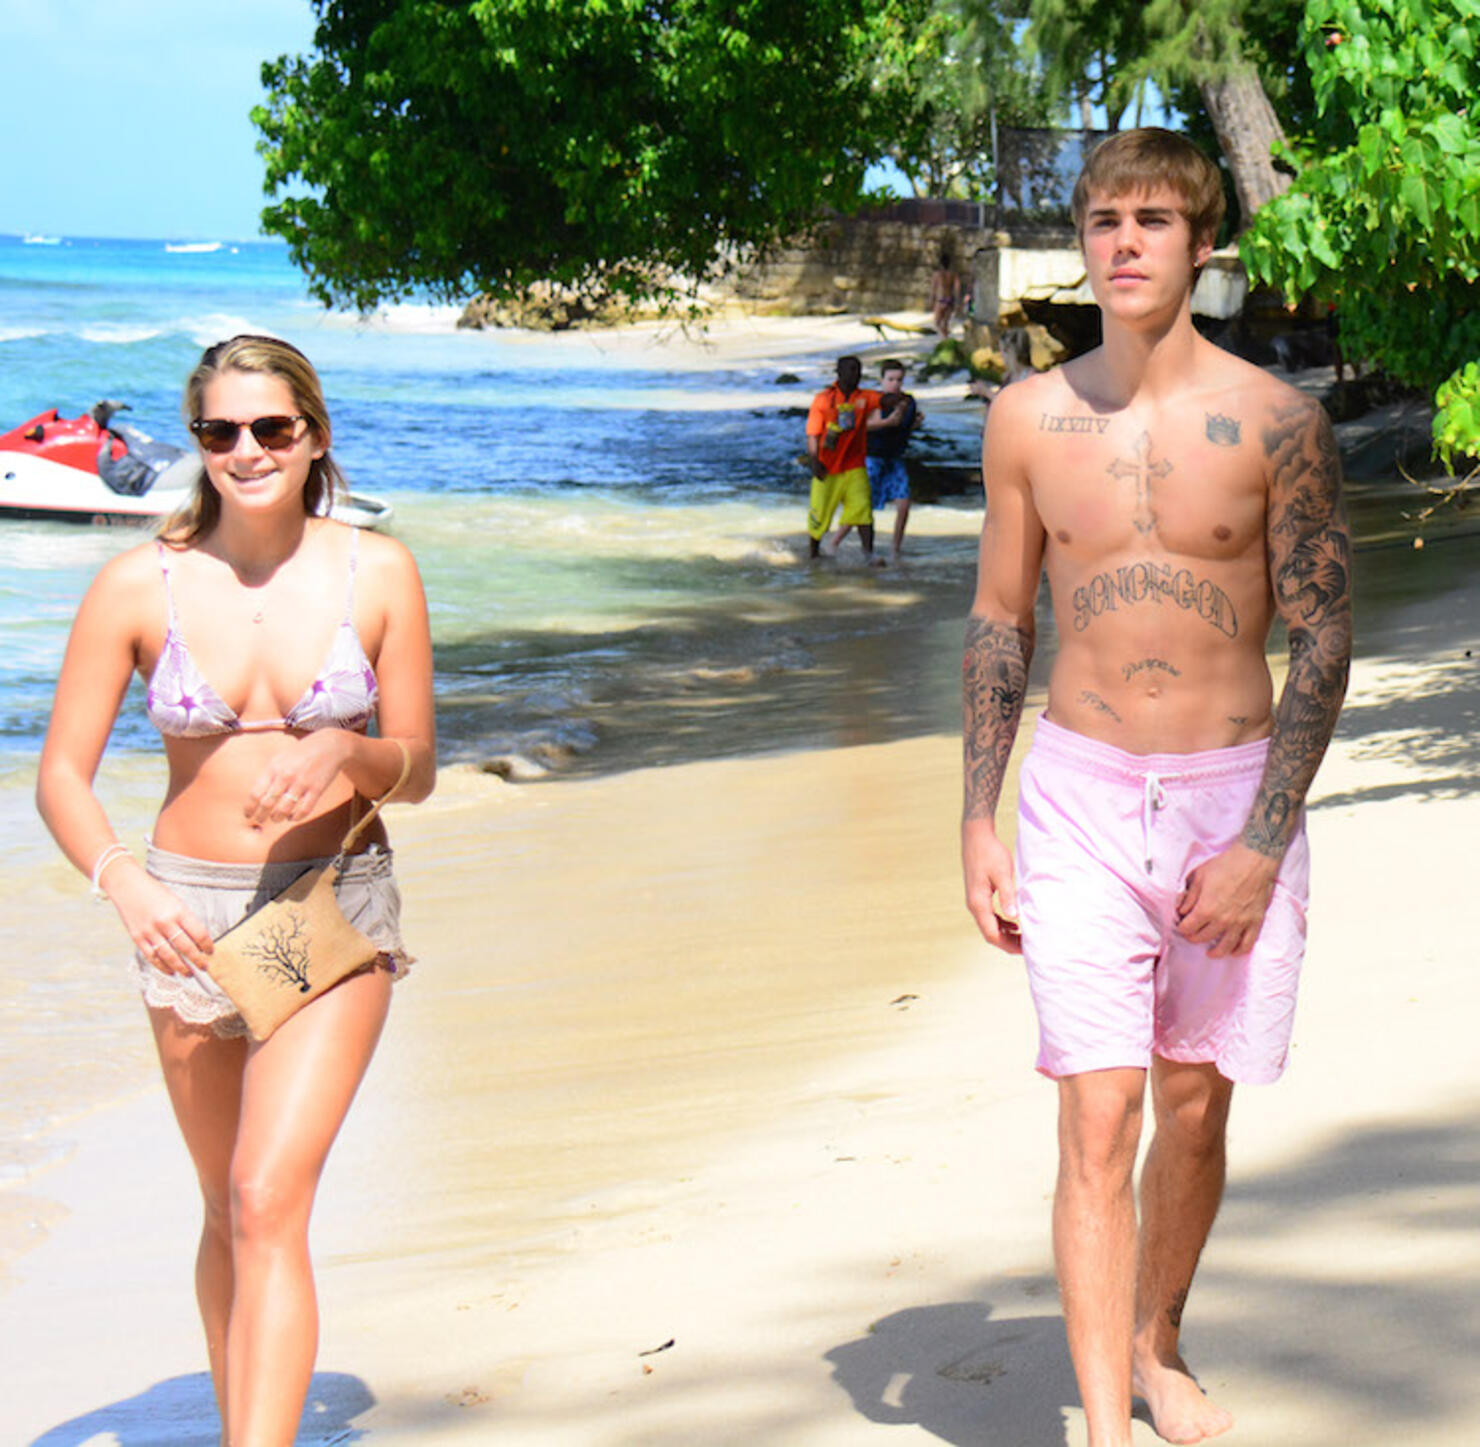 A shirtless Justin Bieber  delighted some bikini clad  with fans on the beach in Barbados.